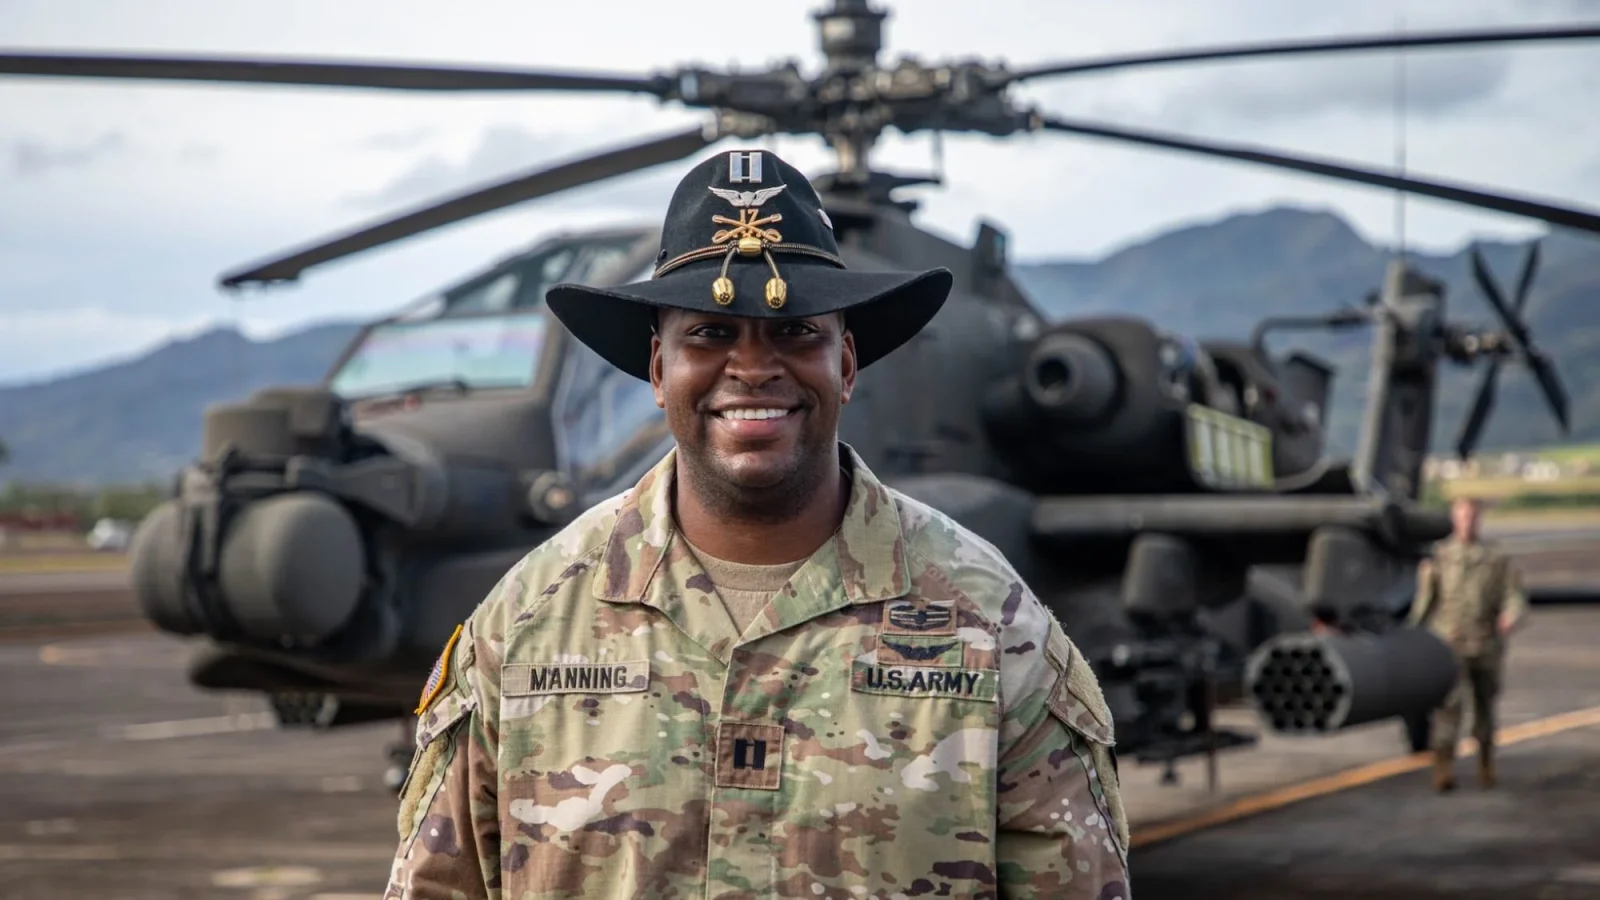 A McCourt Student and U.S. Army Captain stands smiling in front of a helicopter. He is a Black man wearing a hat decorated with military regalia and U.S. Army fatigues.